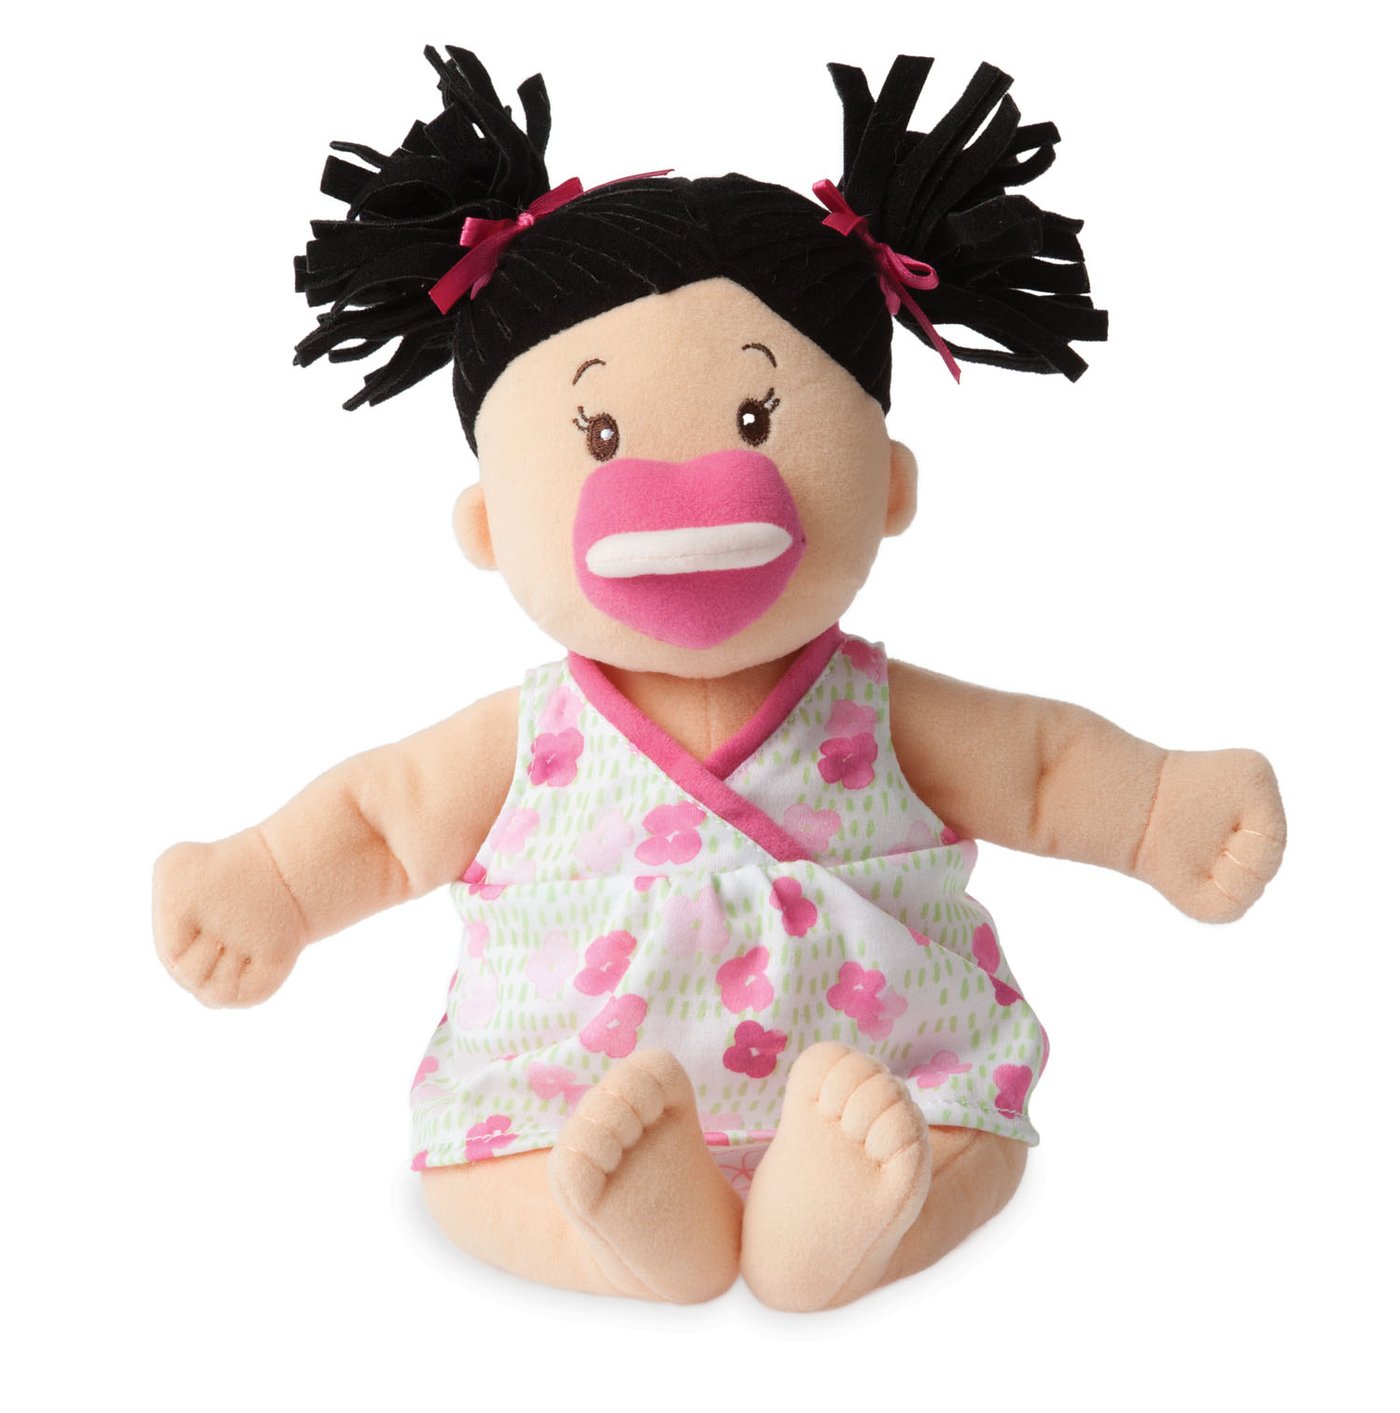 Manhattan Toy Baby Stella Peach Doll with Black Pigtails Toy, -- ANB Baby